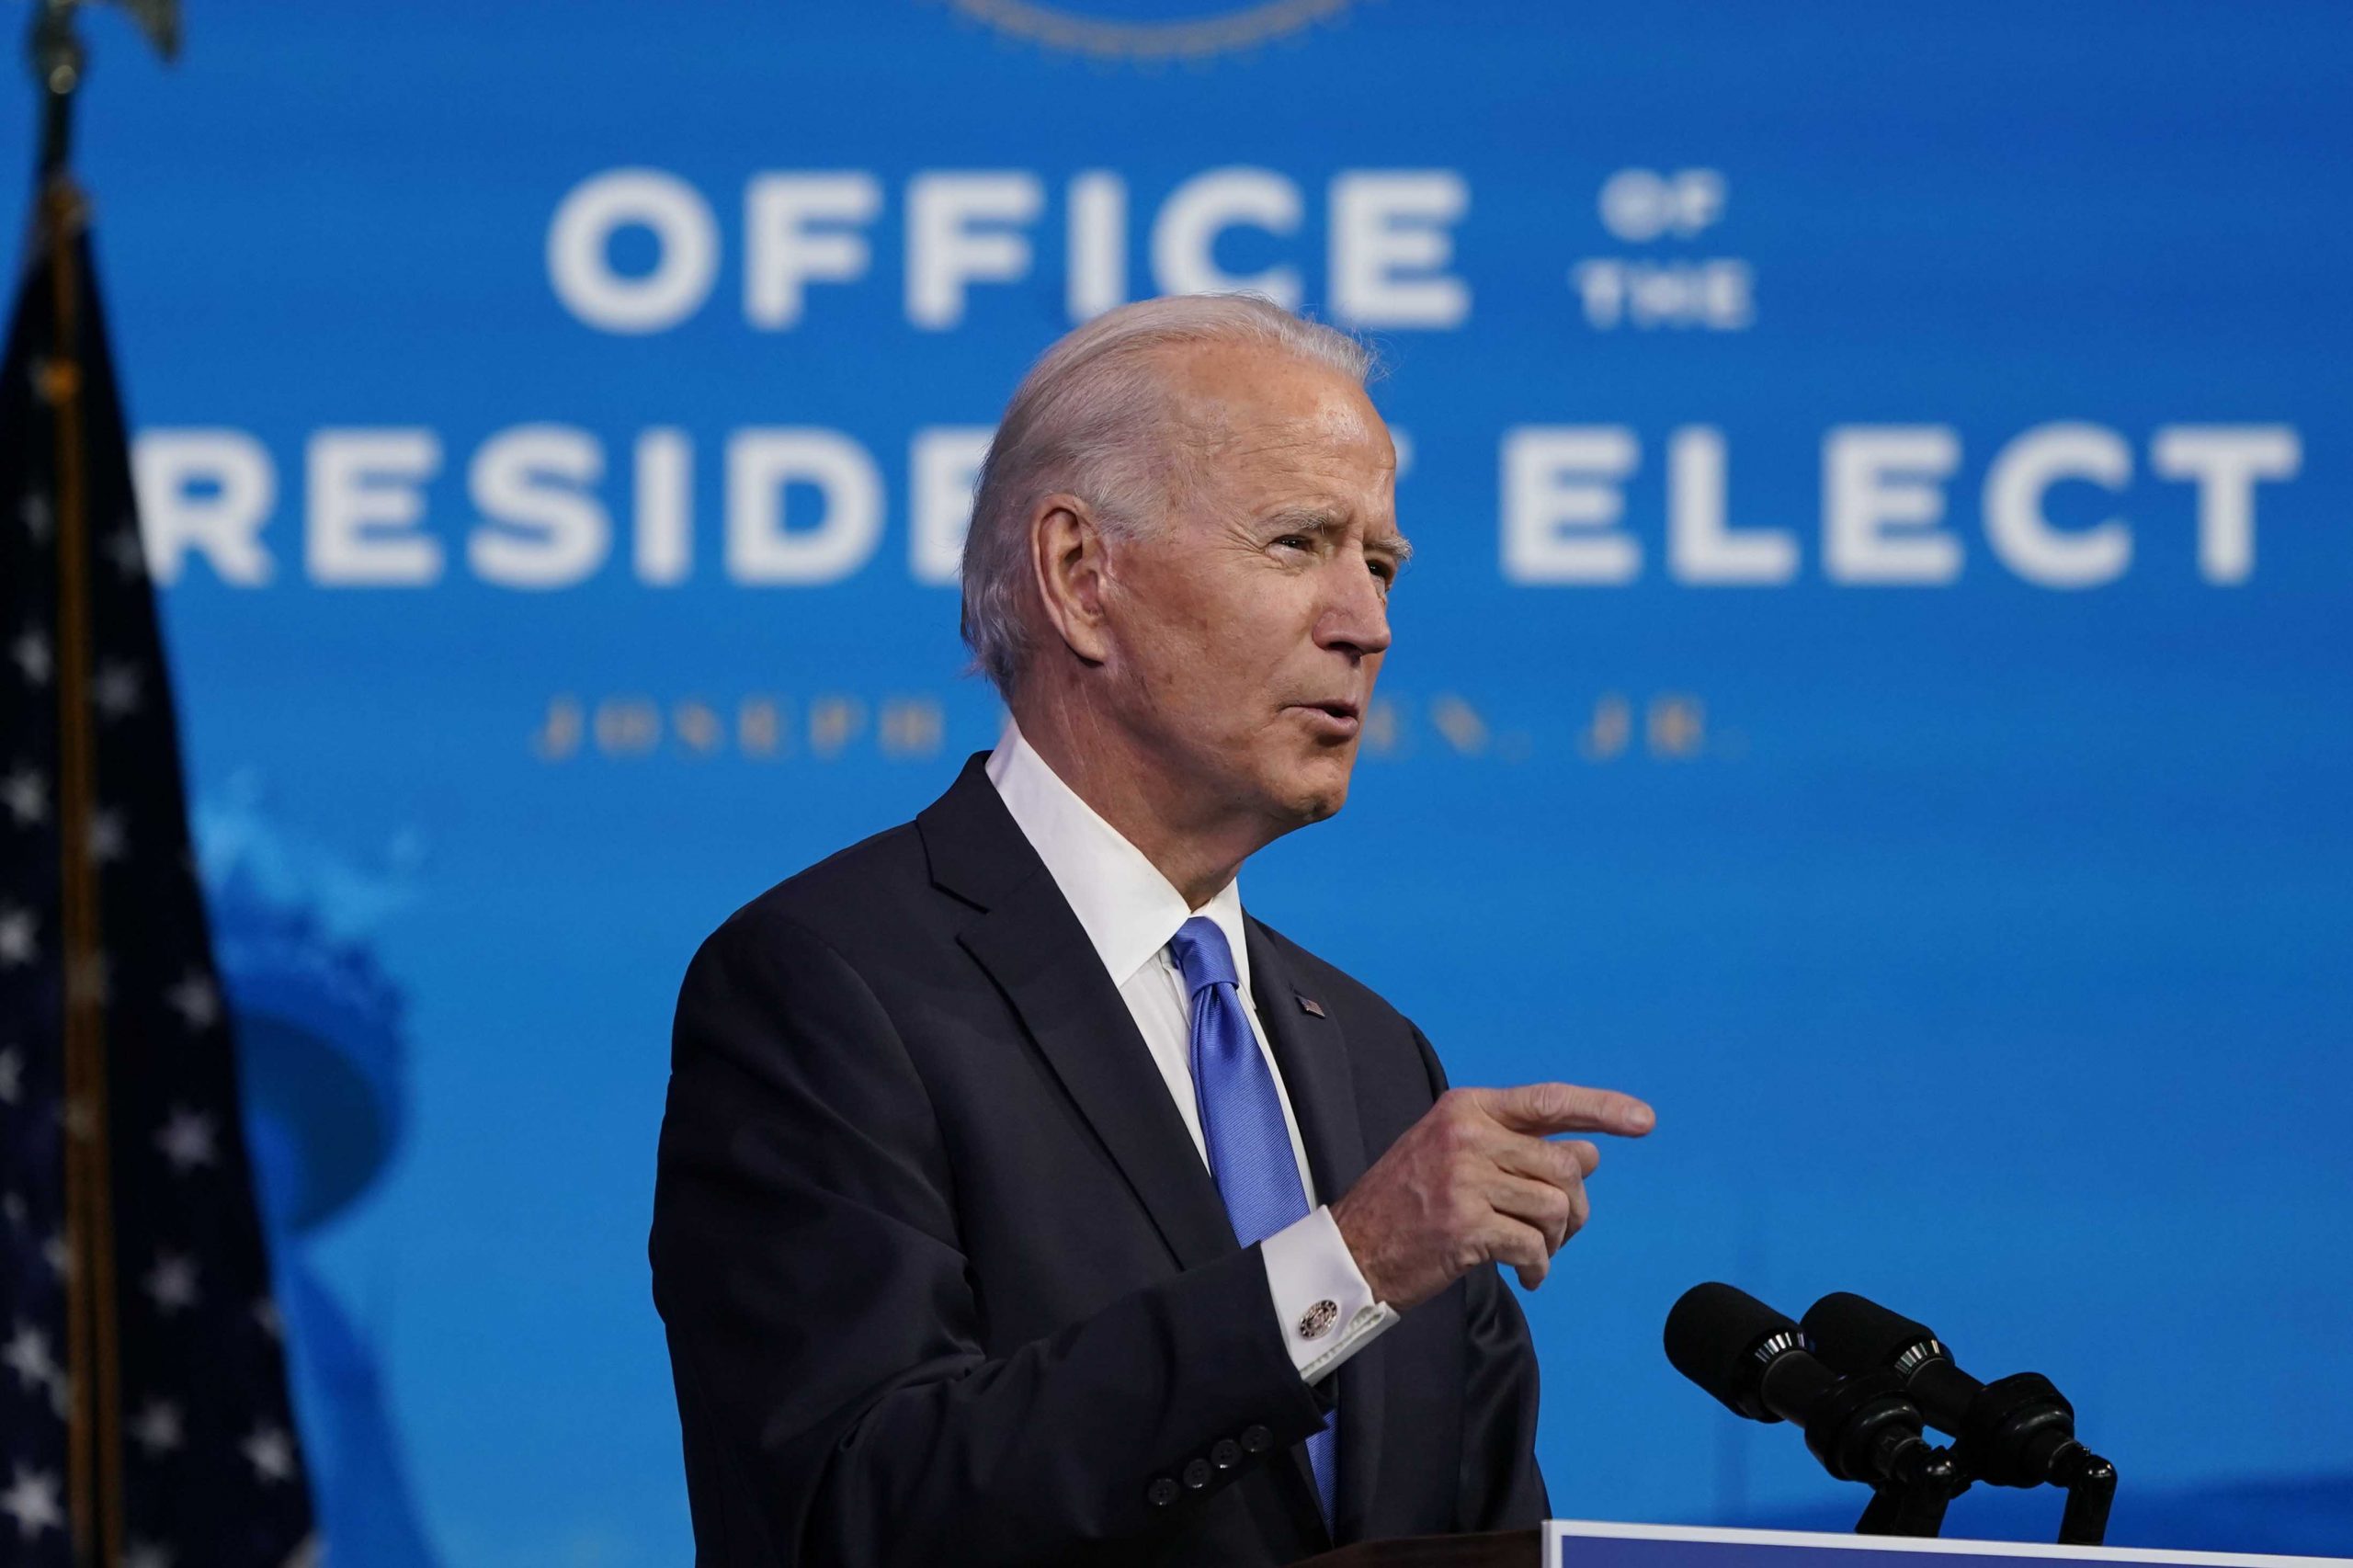 Biden’s inaugural committee tells People to remain residence for his swearing-in